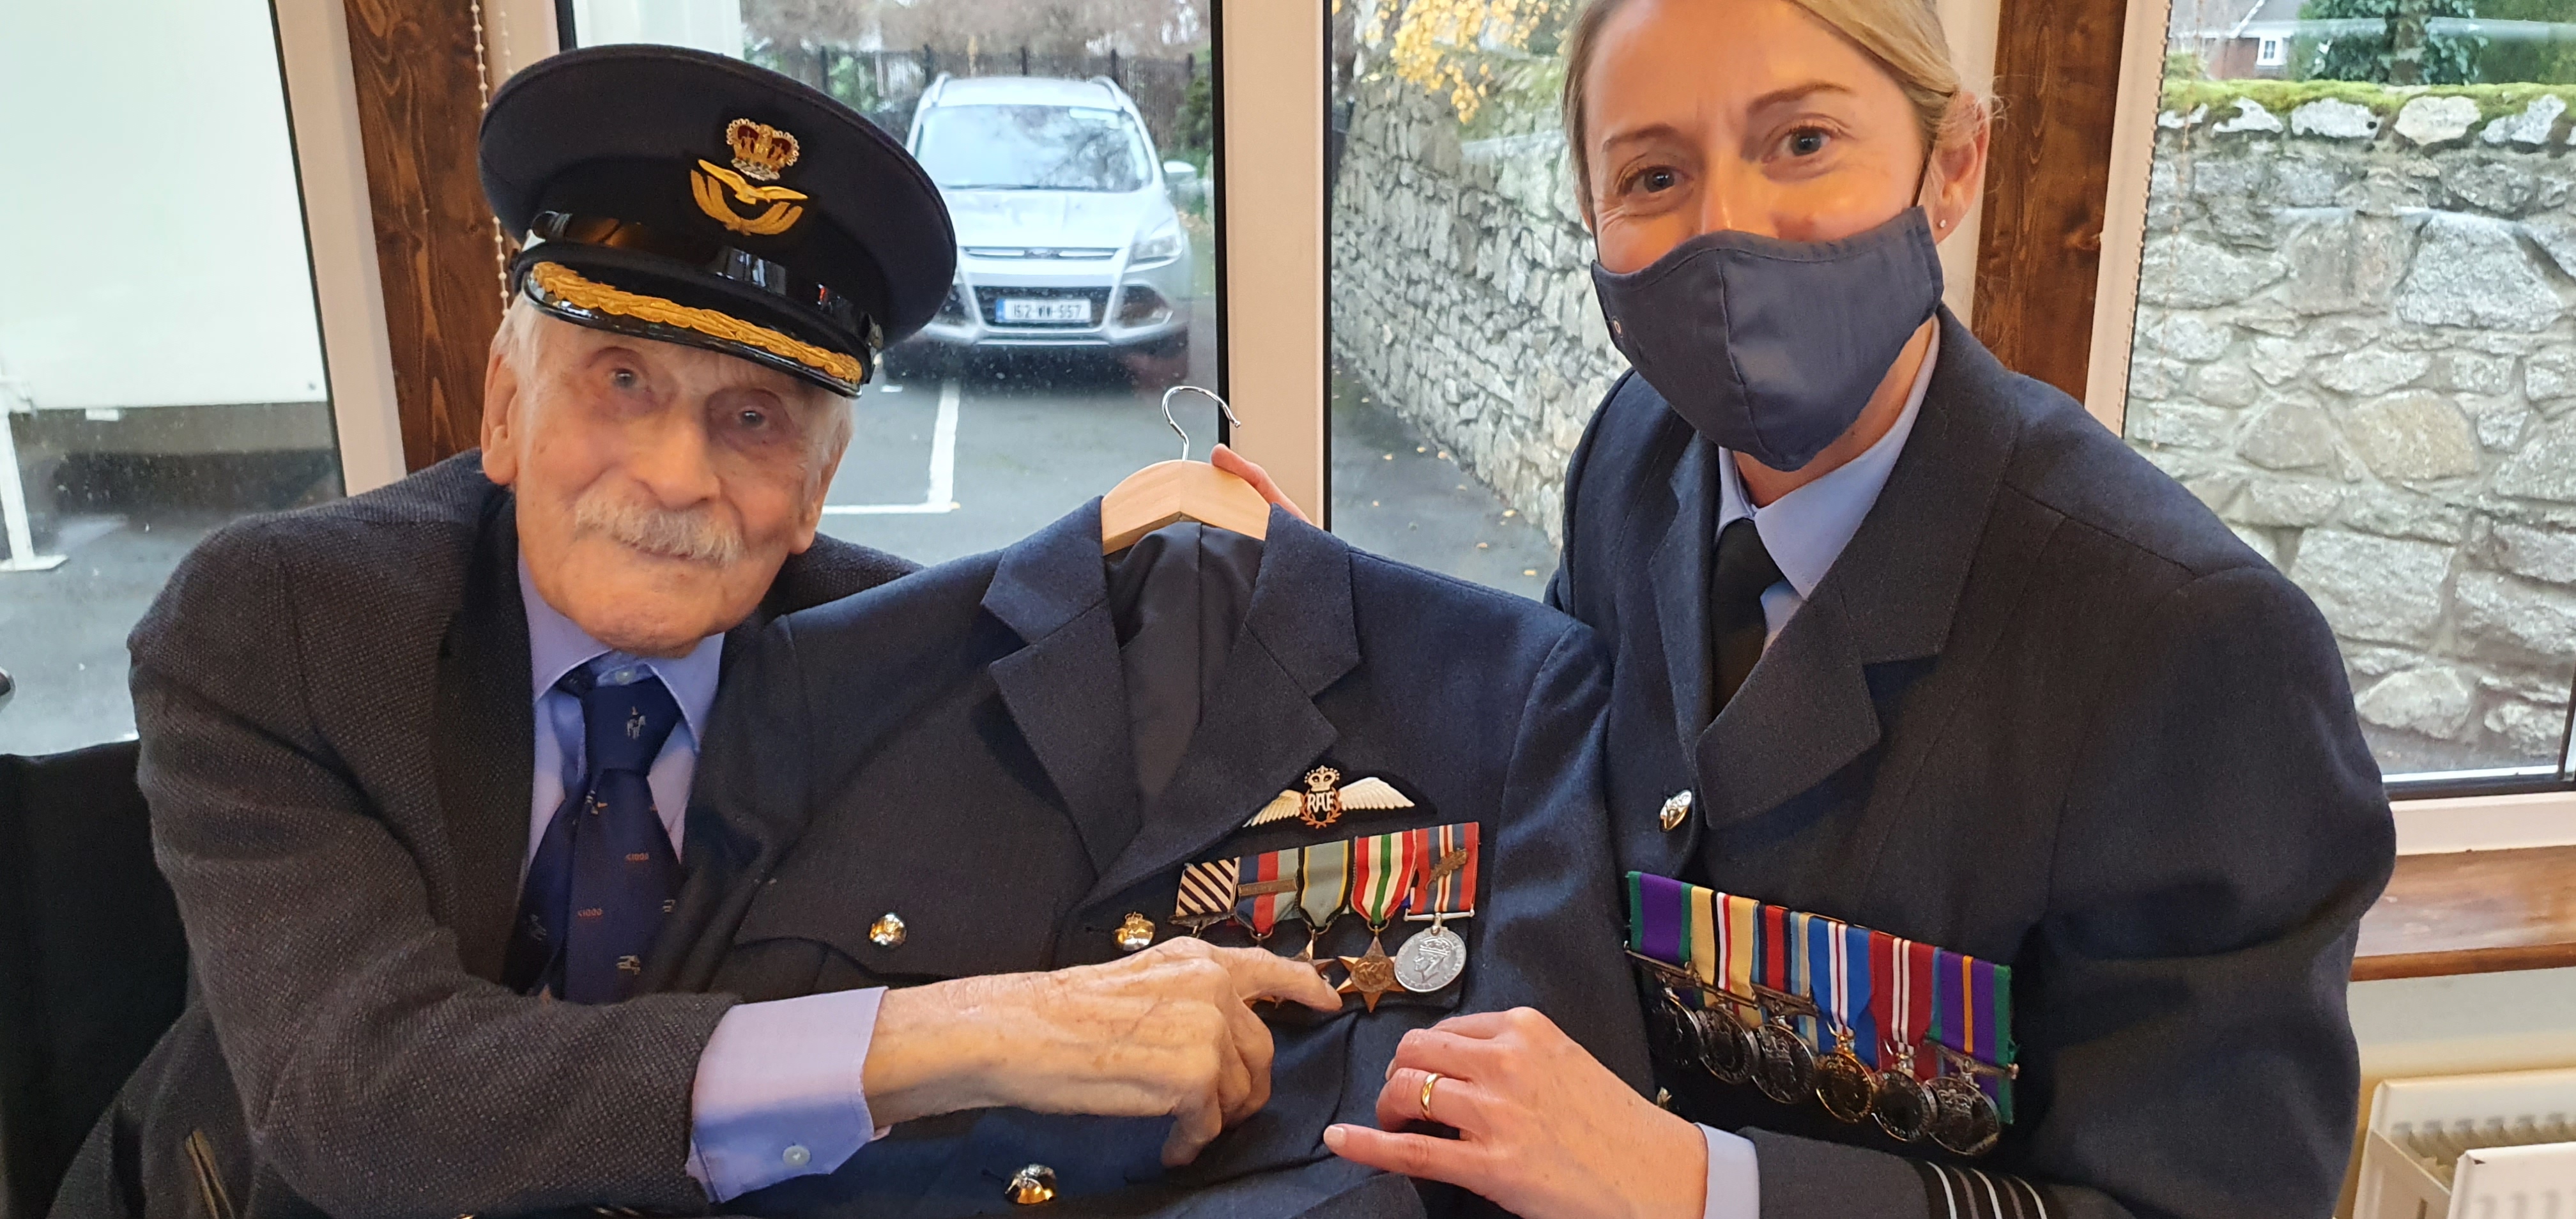 John and Wing Commander Rankin hold the restored uniform and medals.